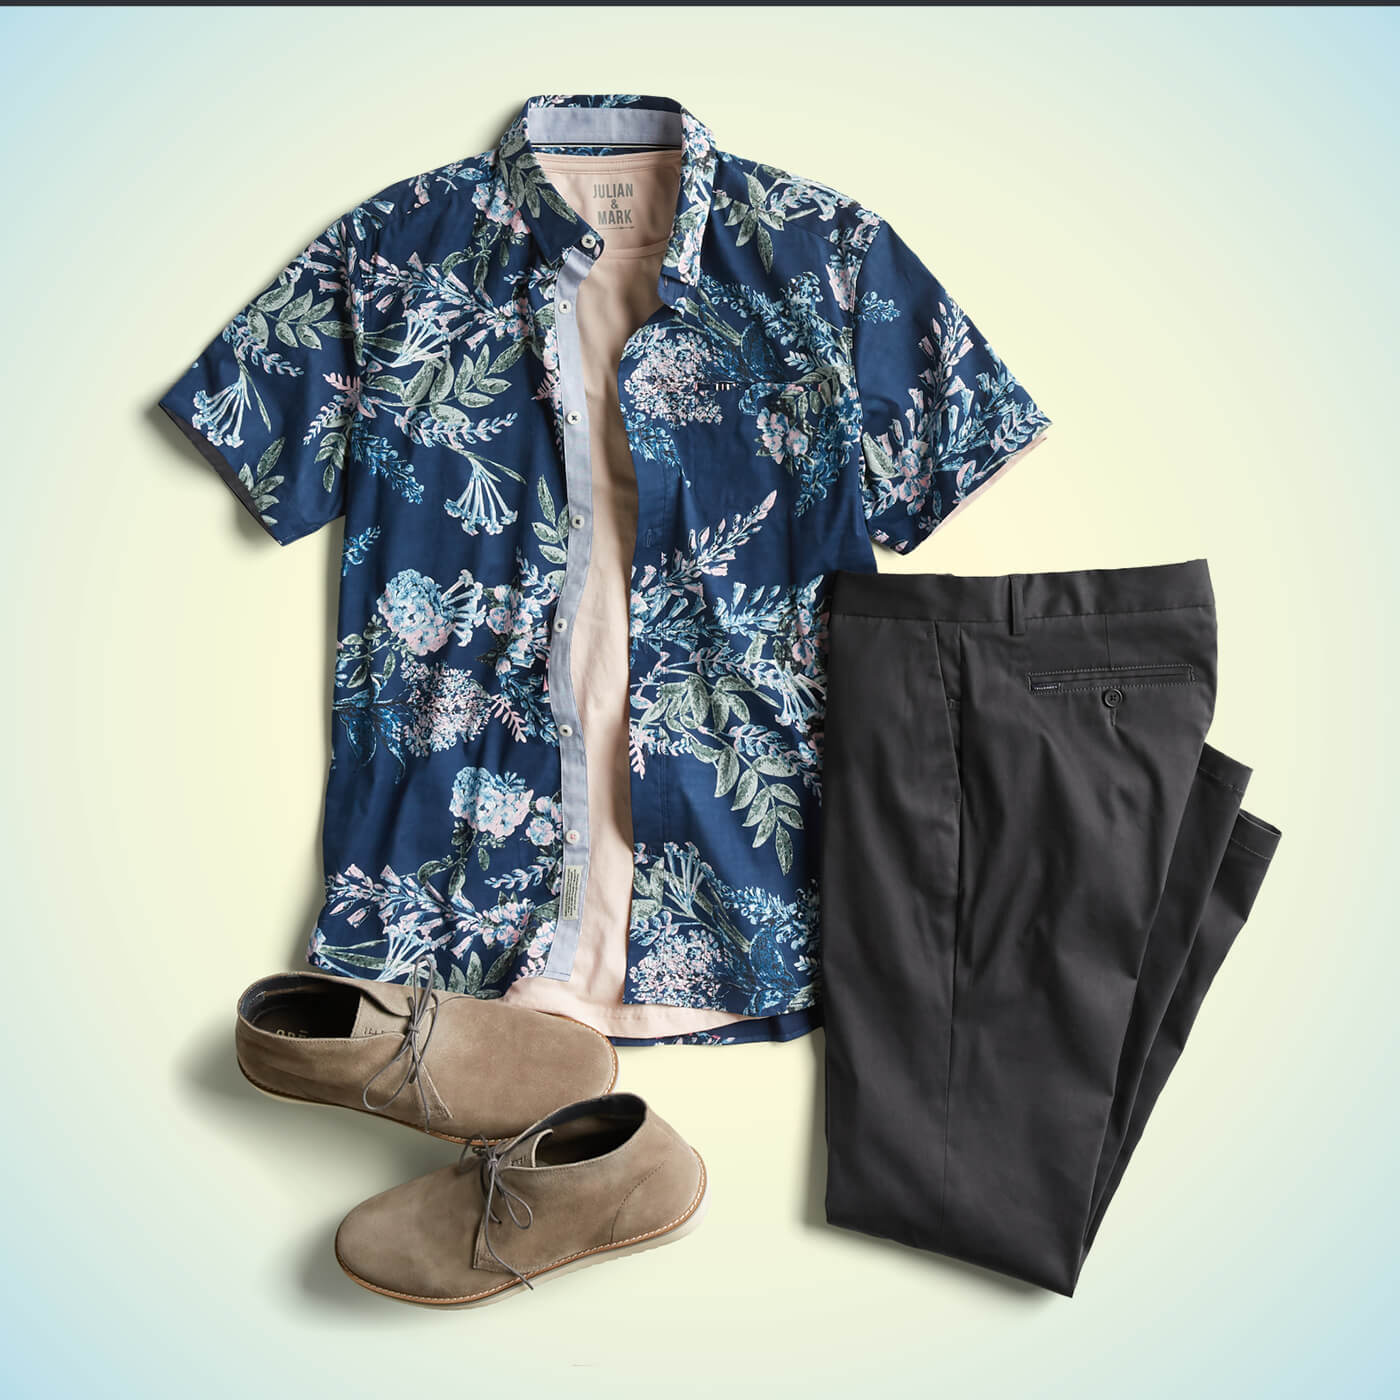 men's spring casual outfits